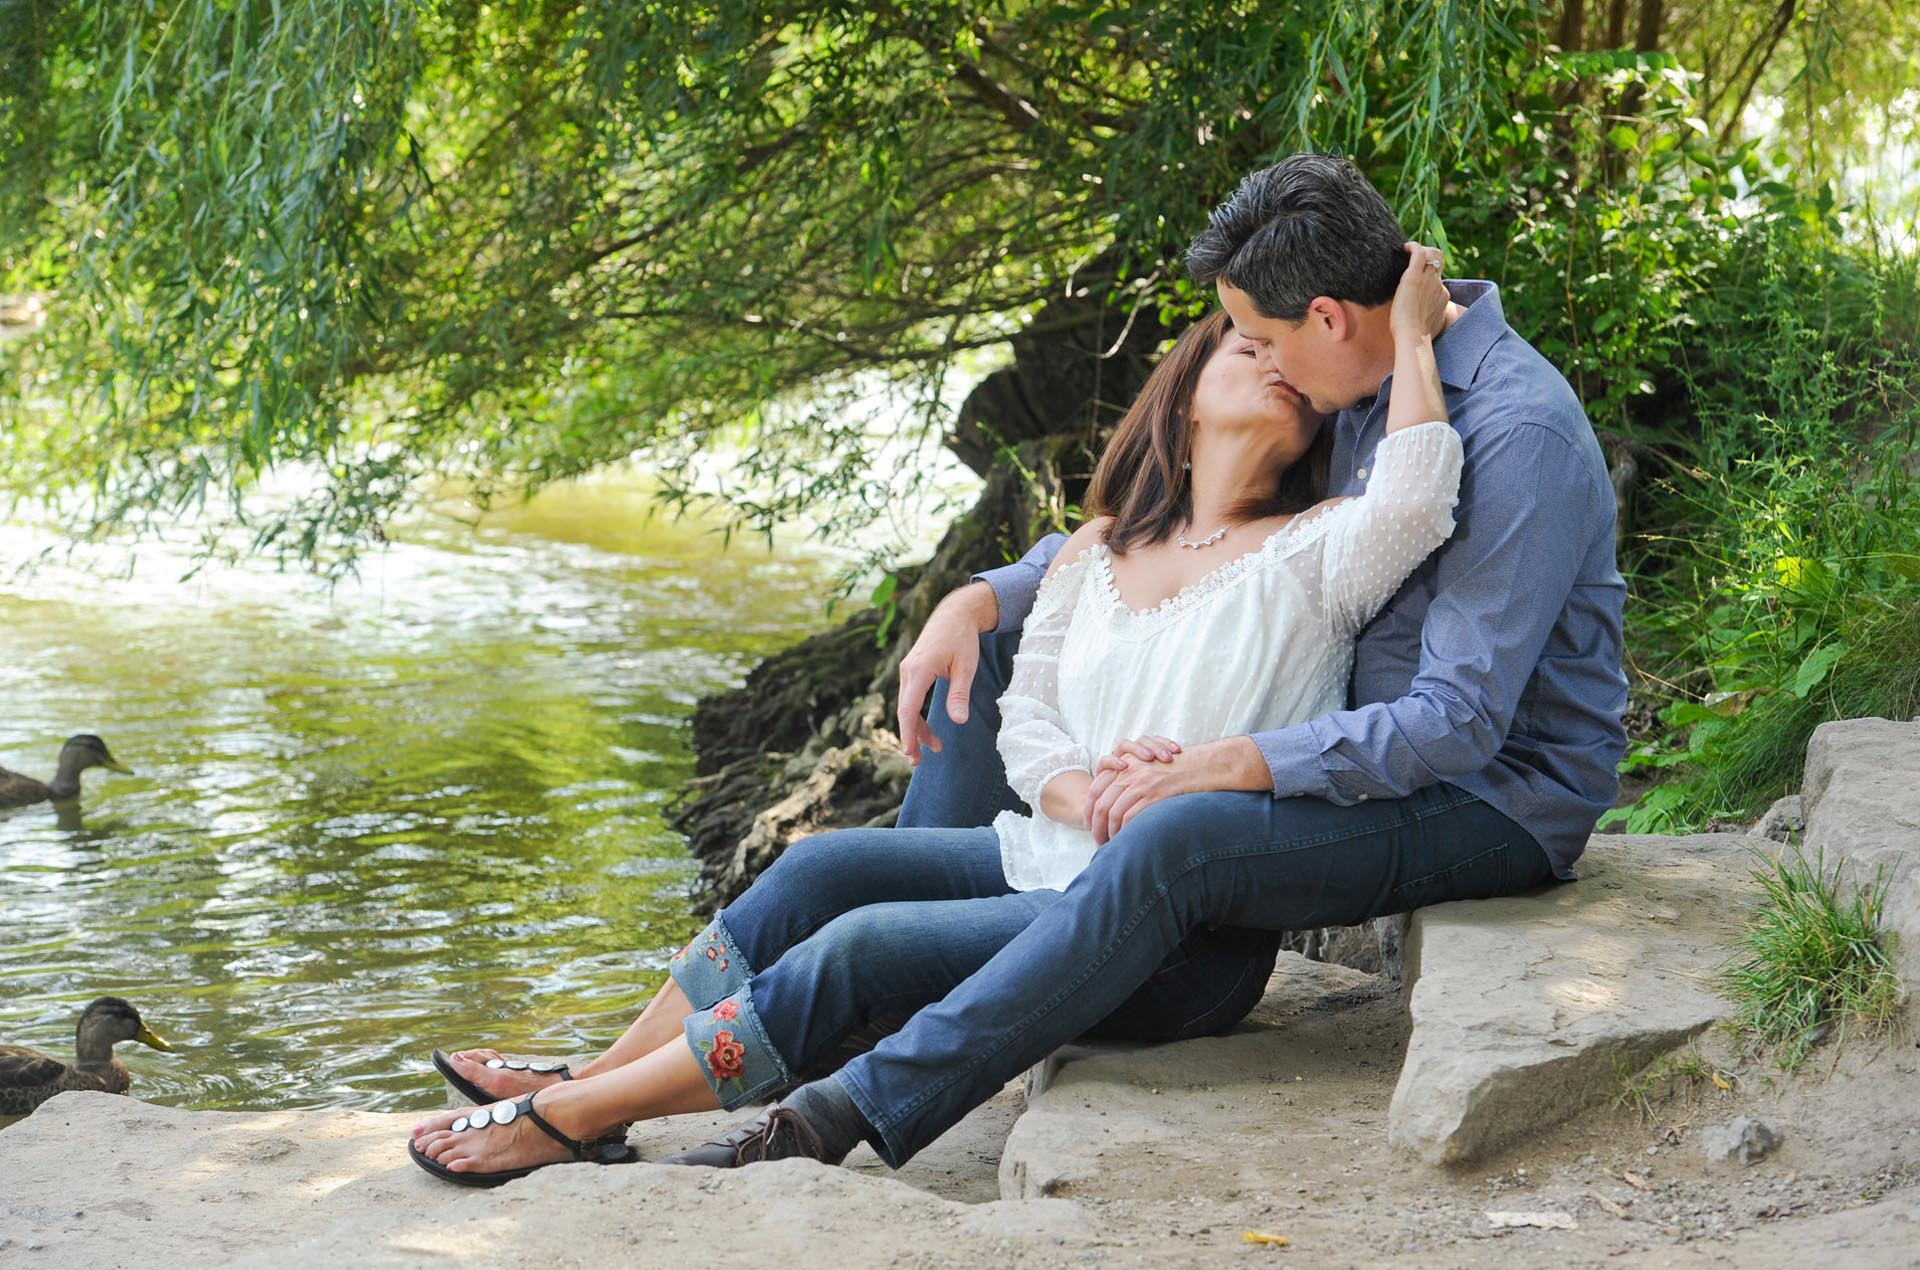 Best Rochester lifestyles photographer's fun and candid engagement photos means capturing joy and personality using different textures and backgrounds like this engagement session in Rochester, Michigan.